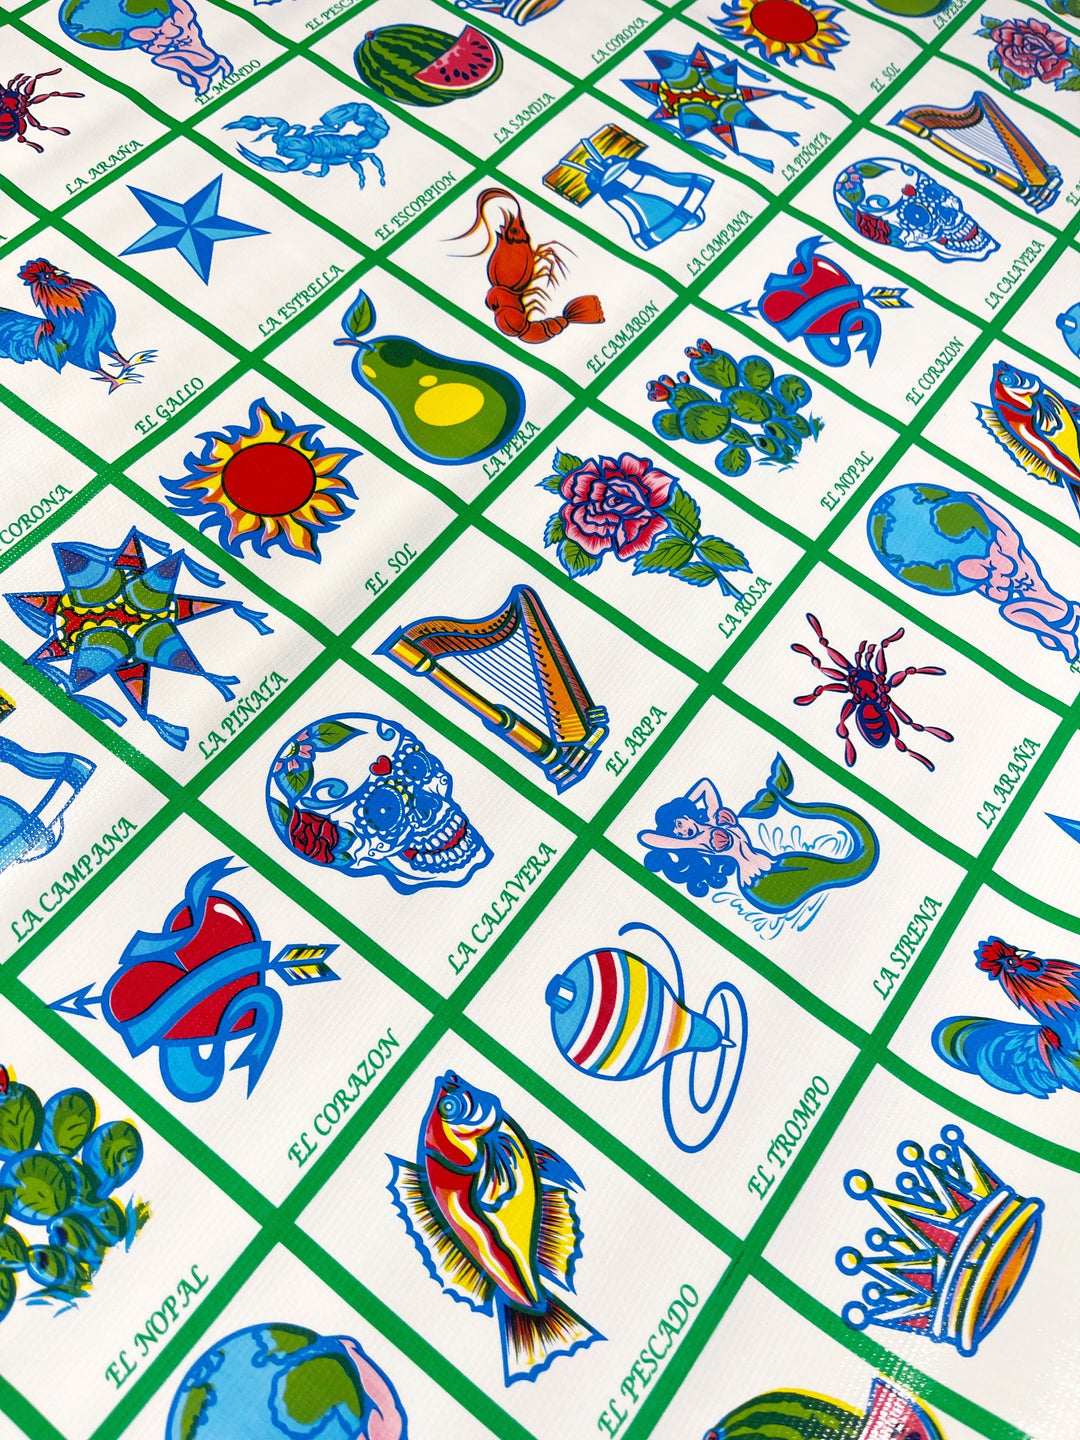 Craftermoon - Loteria Oilcloth Fabric in Green by the Yard